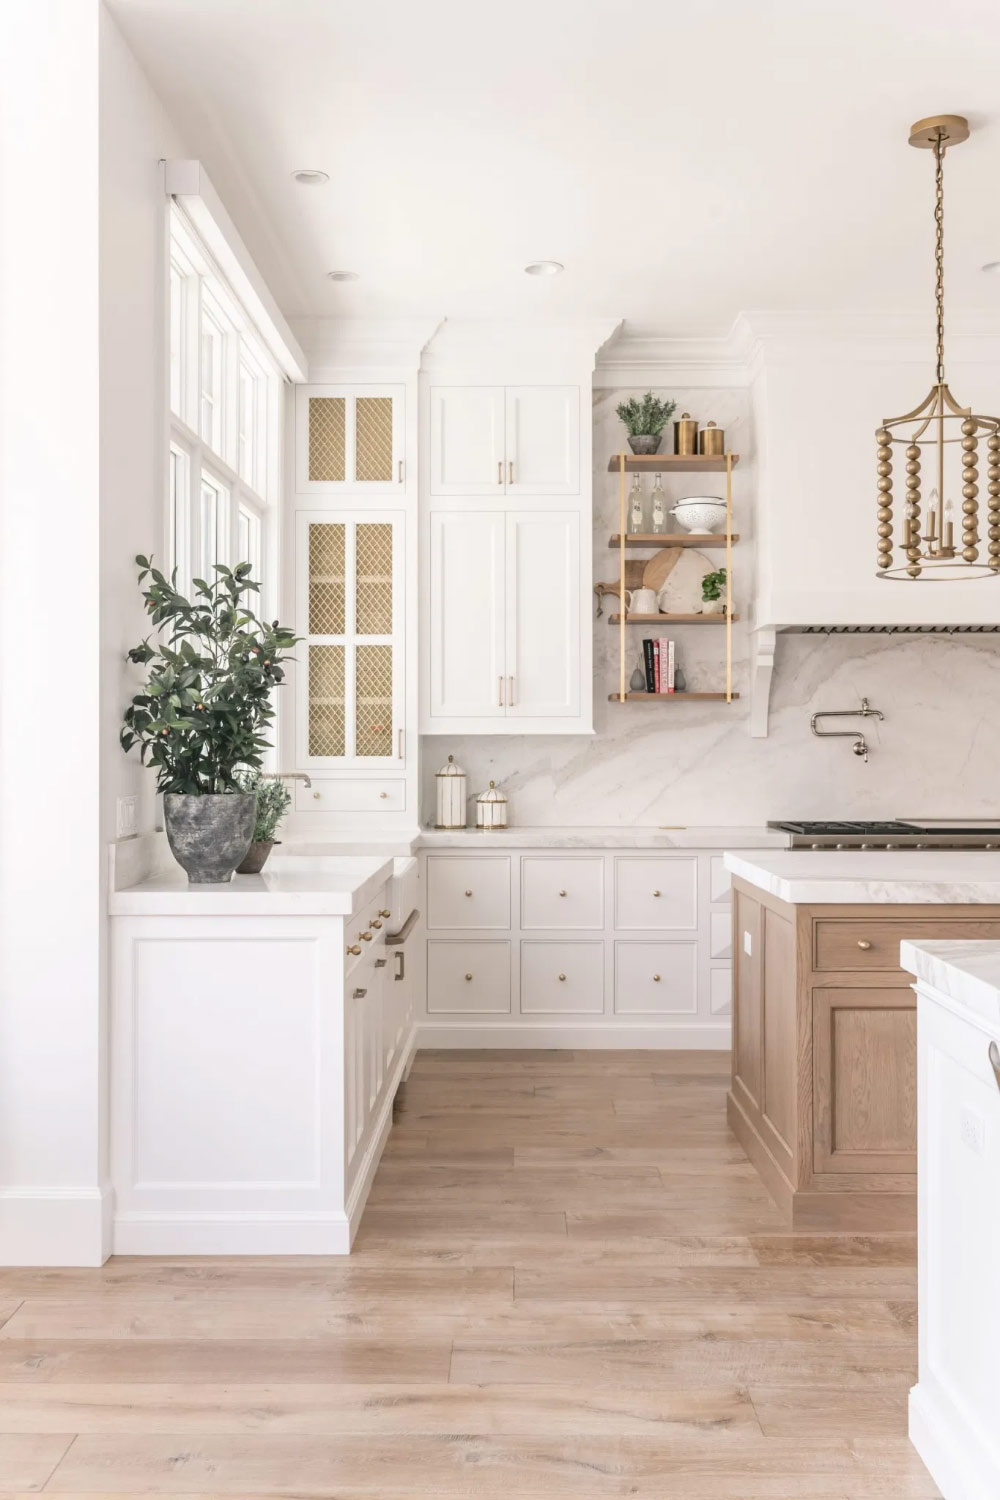 French Country Kitchens Your Guide to Achieving the Look